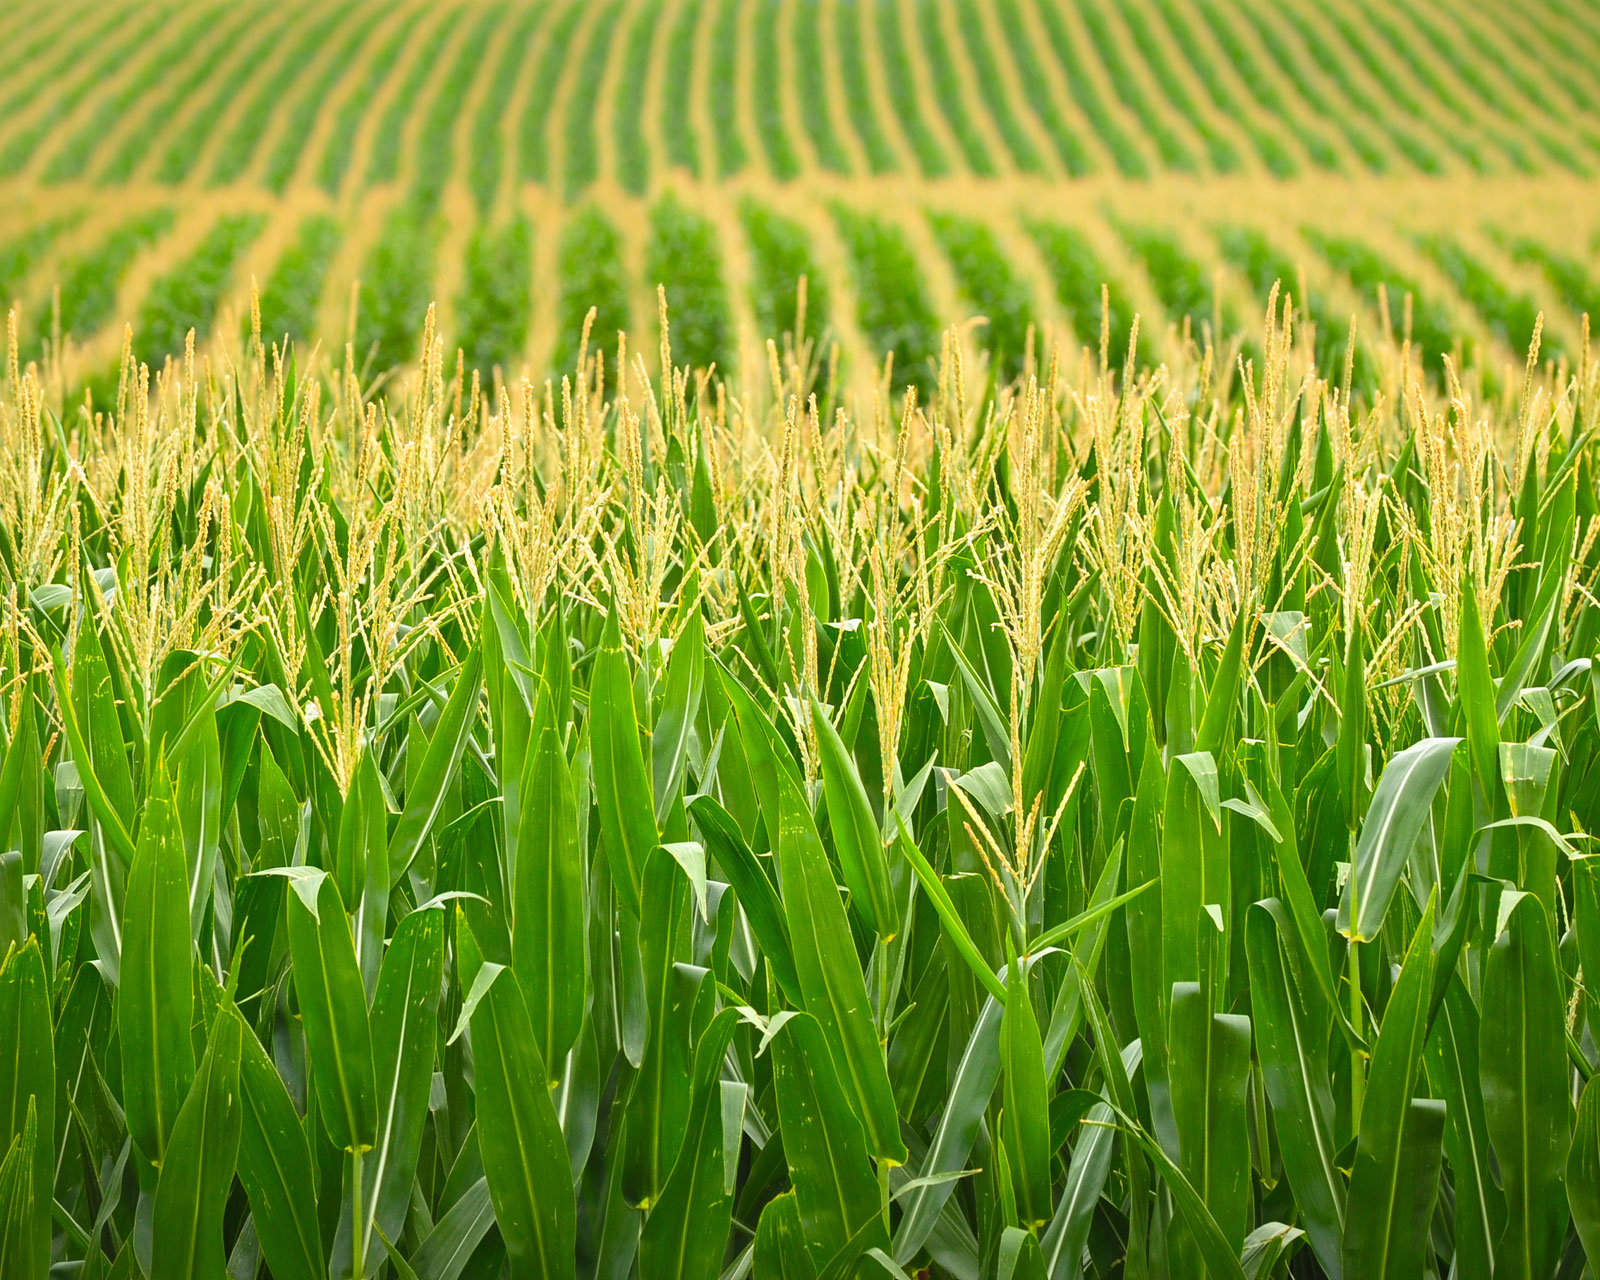 Latest USDA Crop Progress Report Shows Few Obstacles As Nation's Crops Race Towards Maturity